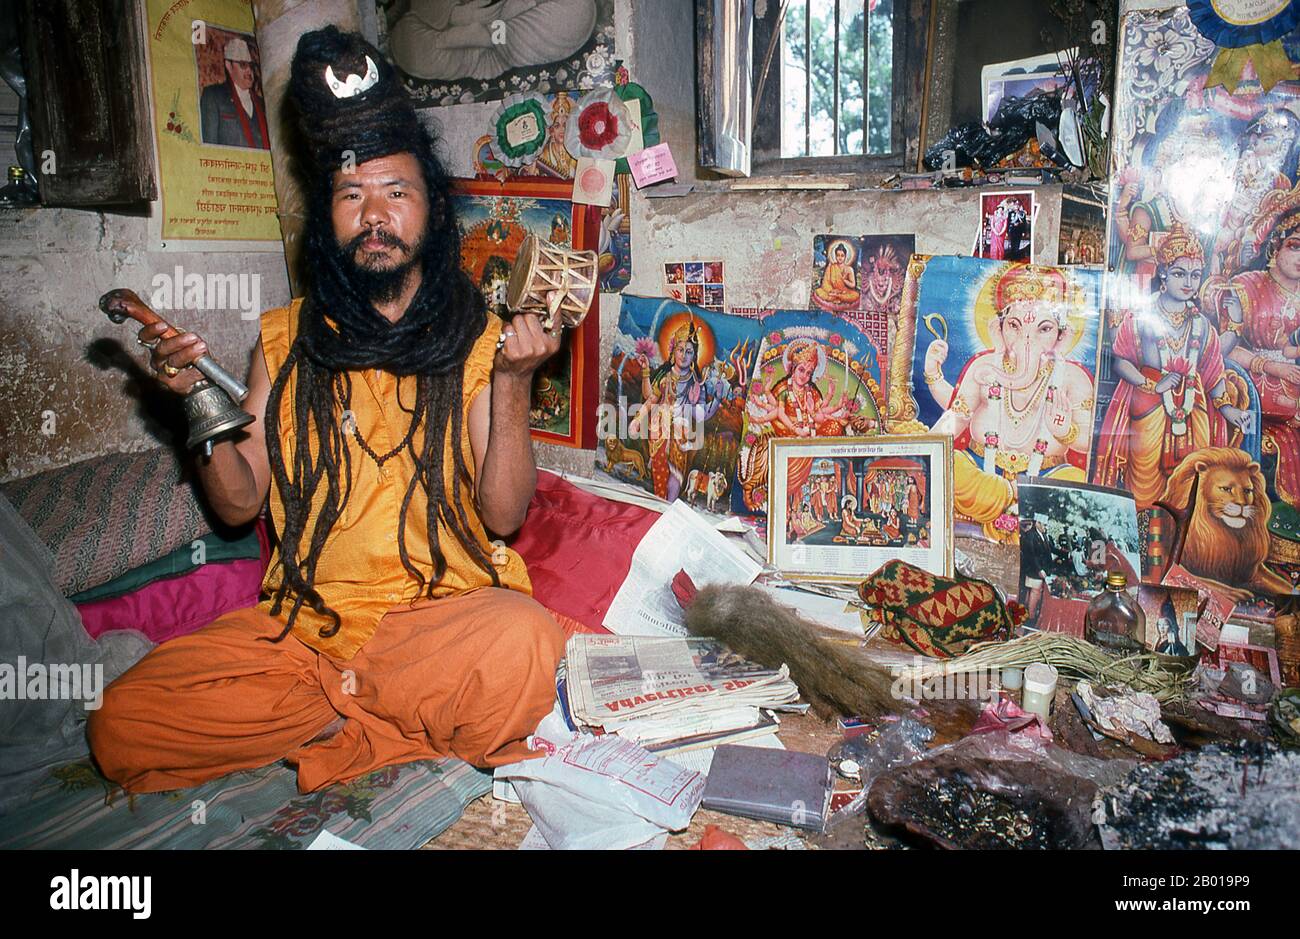 Nepal: Shiva Avartari Lama, Pashupatinath, Kathmandu.  They are known, variously, as sadhus (saints, or 'good ones'), yogis (ascetic practitioners), fakirs (ascetic seeker after the Truth) and sannyasins (wandering mendicants and ascetics). They are the ascetic – and often eccentric – practitioners of an austere form of Hinduism. Sworn to cast off earthly desires, some choose to live as anchorites in the wilderness. Others are of a less retiring disposition, especially in the towns and temples of Nepal's Kathmandu Valley. Stock Photo